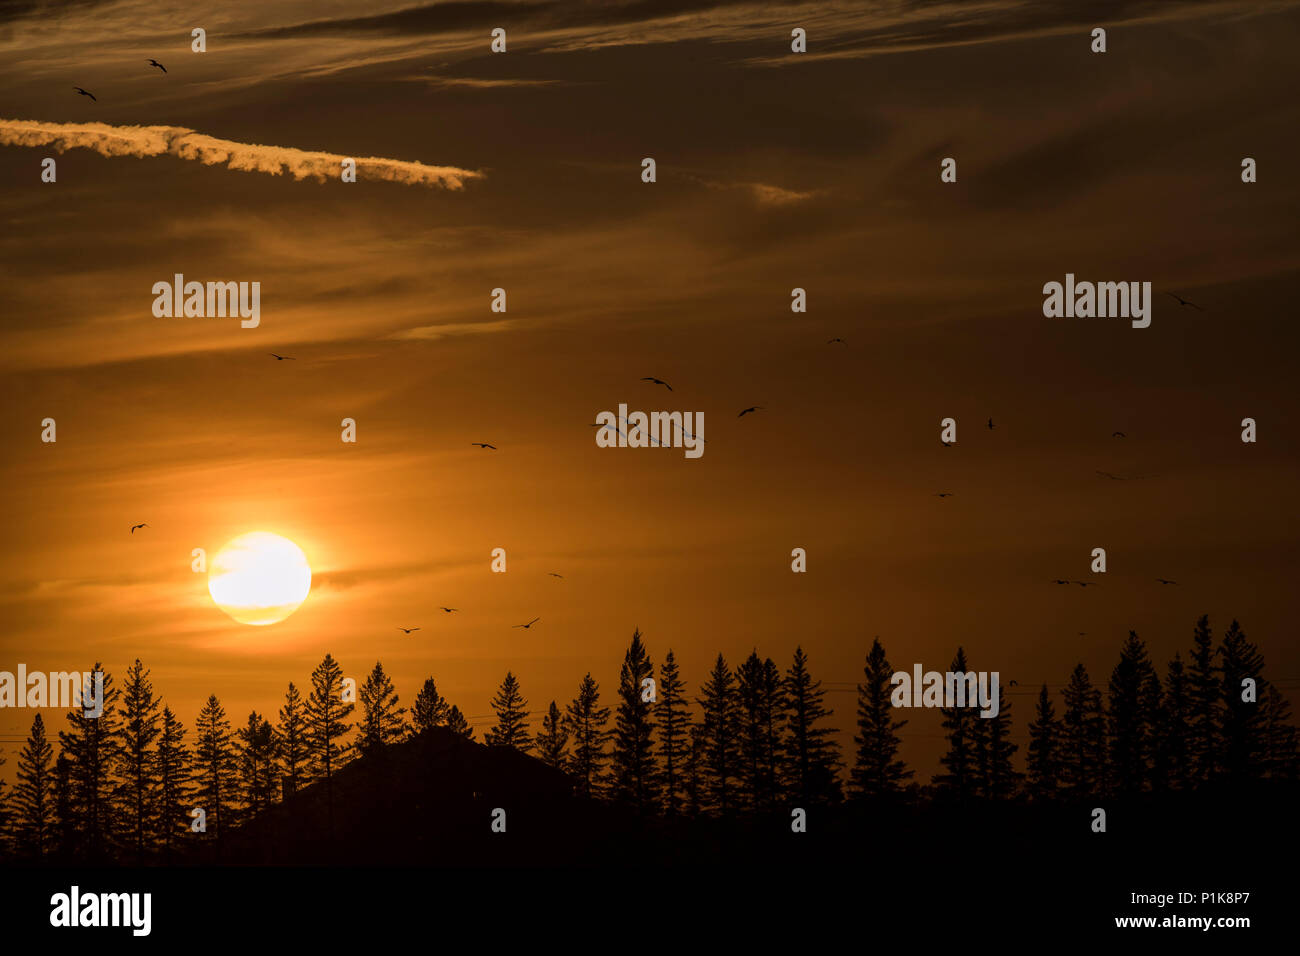 Rural forest sunset, Canada Stock Photo